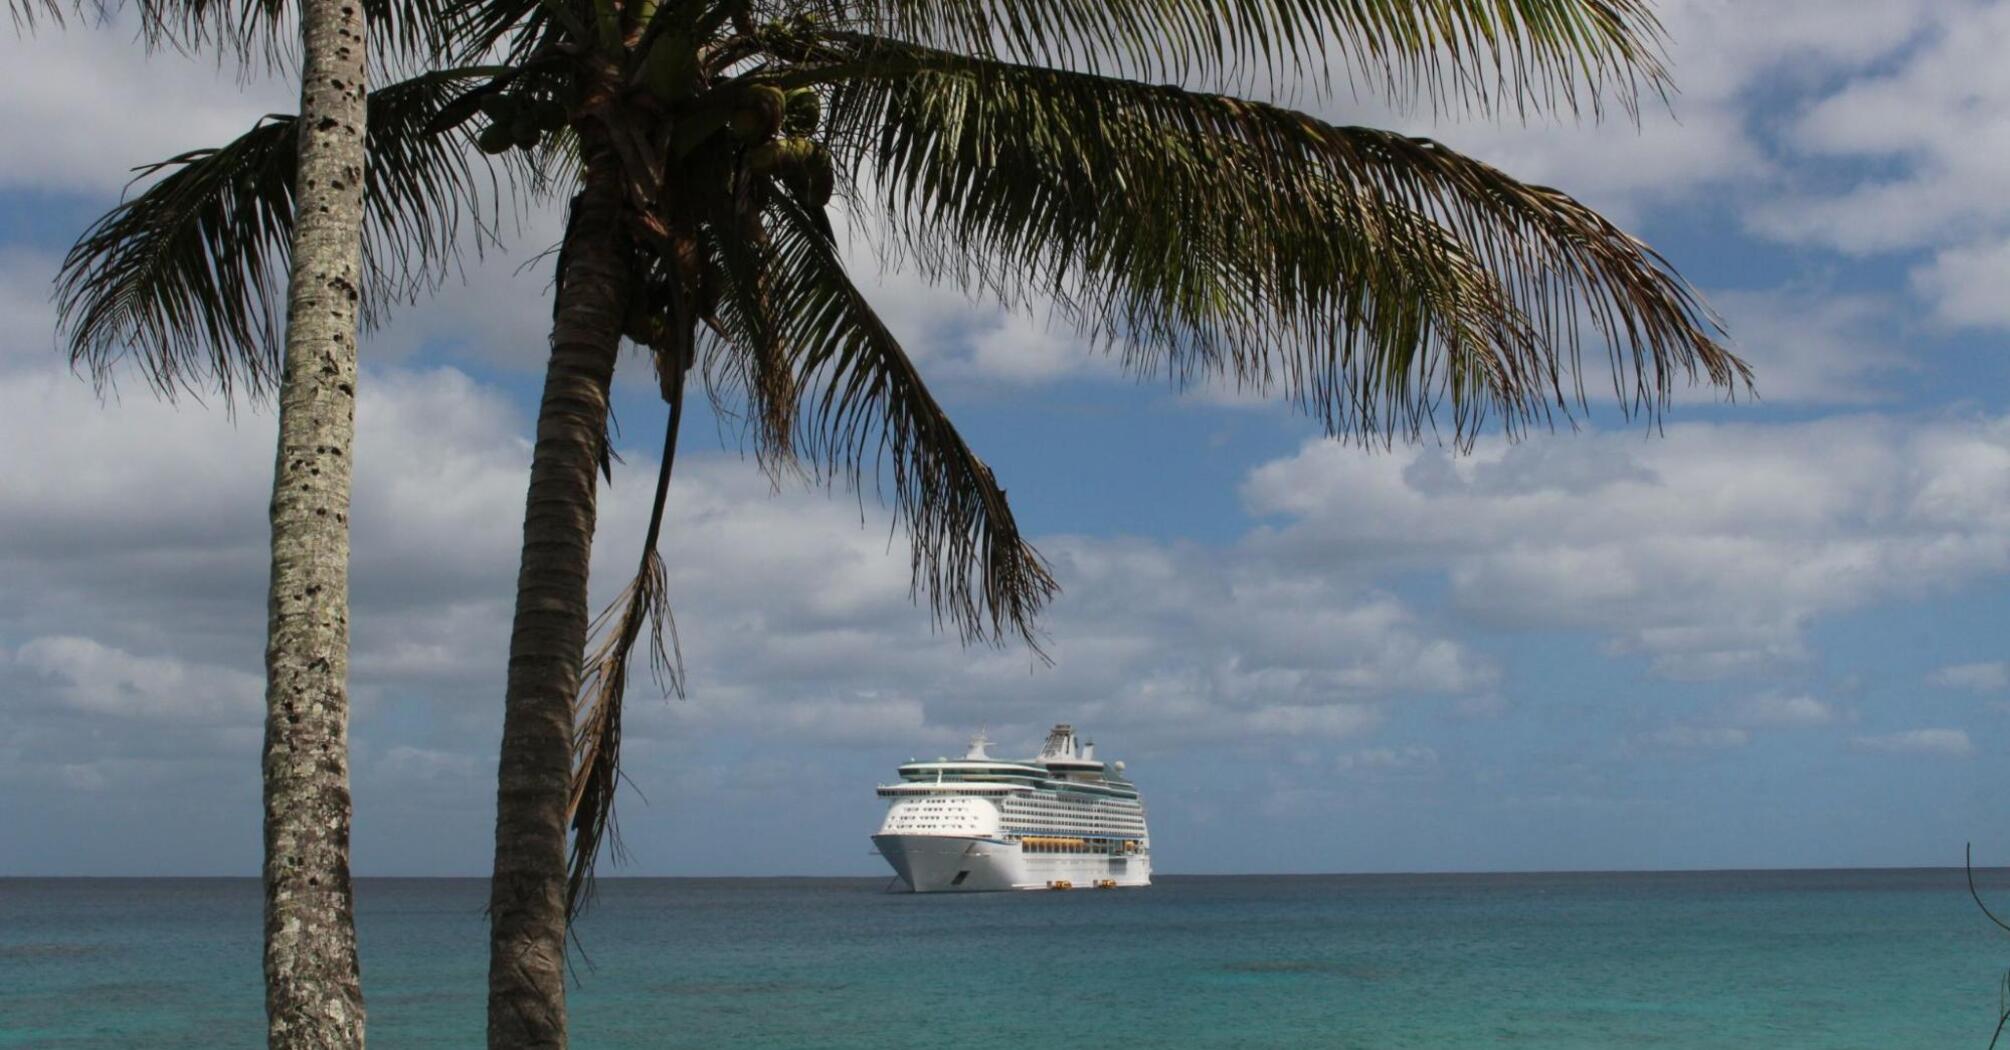 Cruise ship combined with palm tree